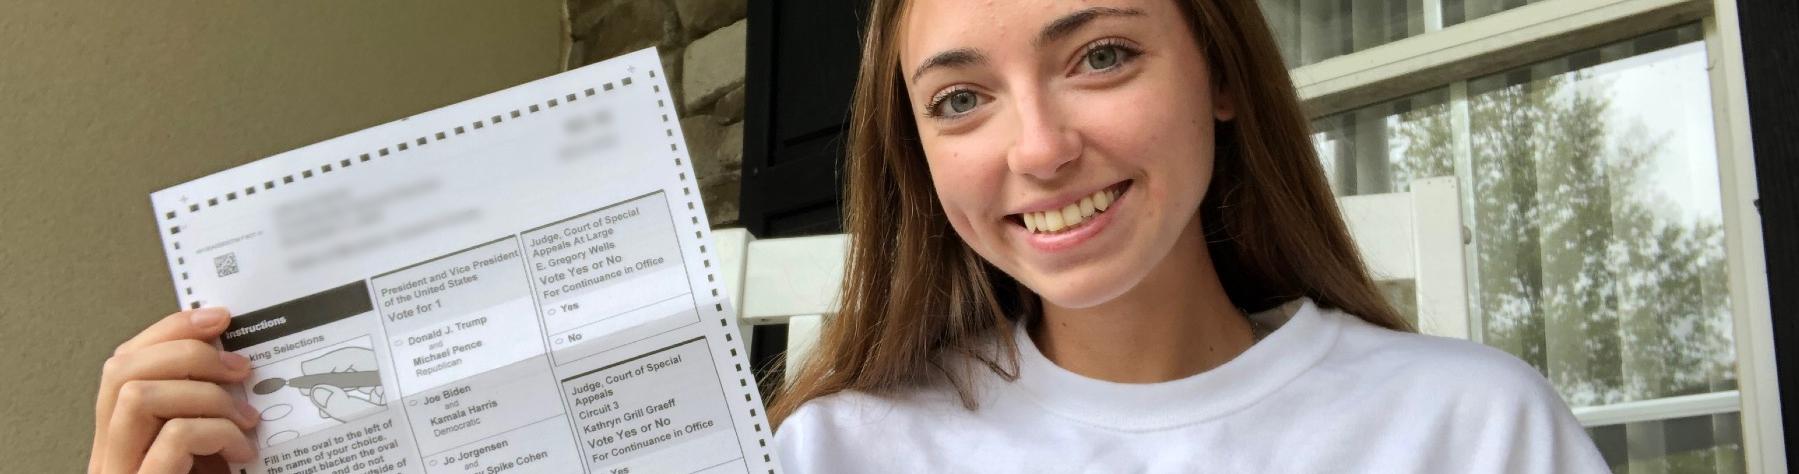 A student holding up a 2020 vote ballot.